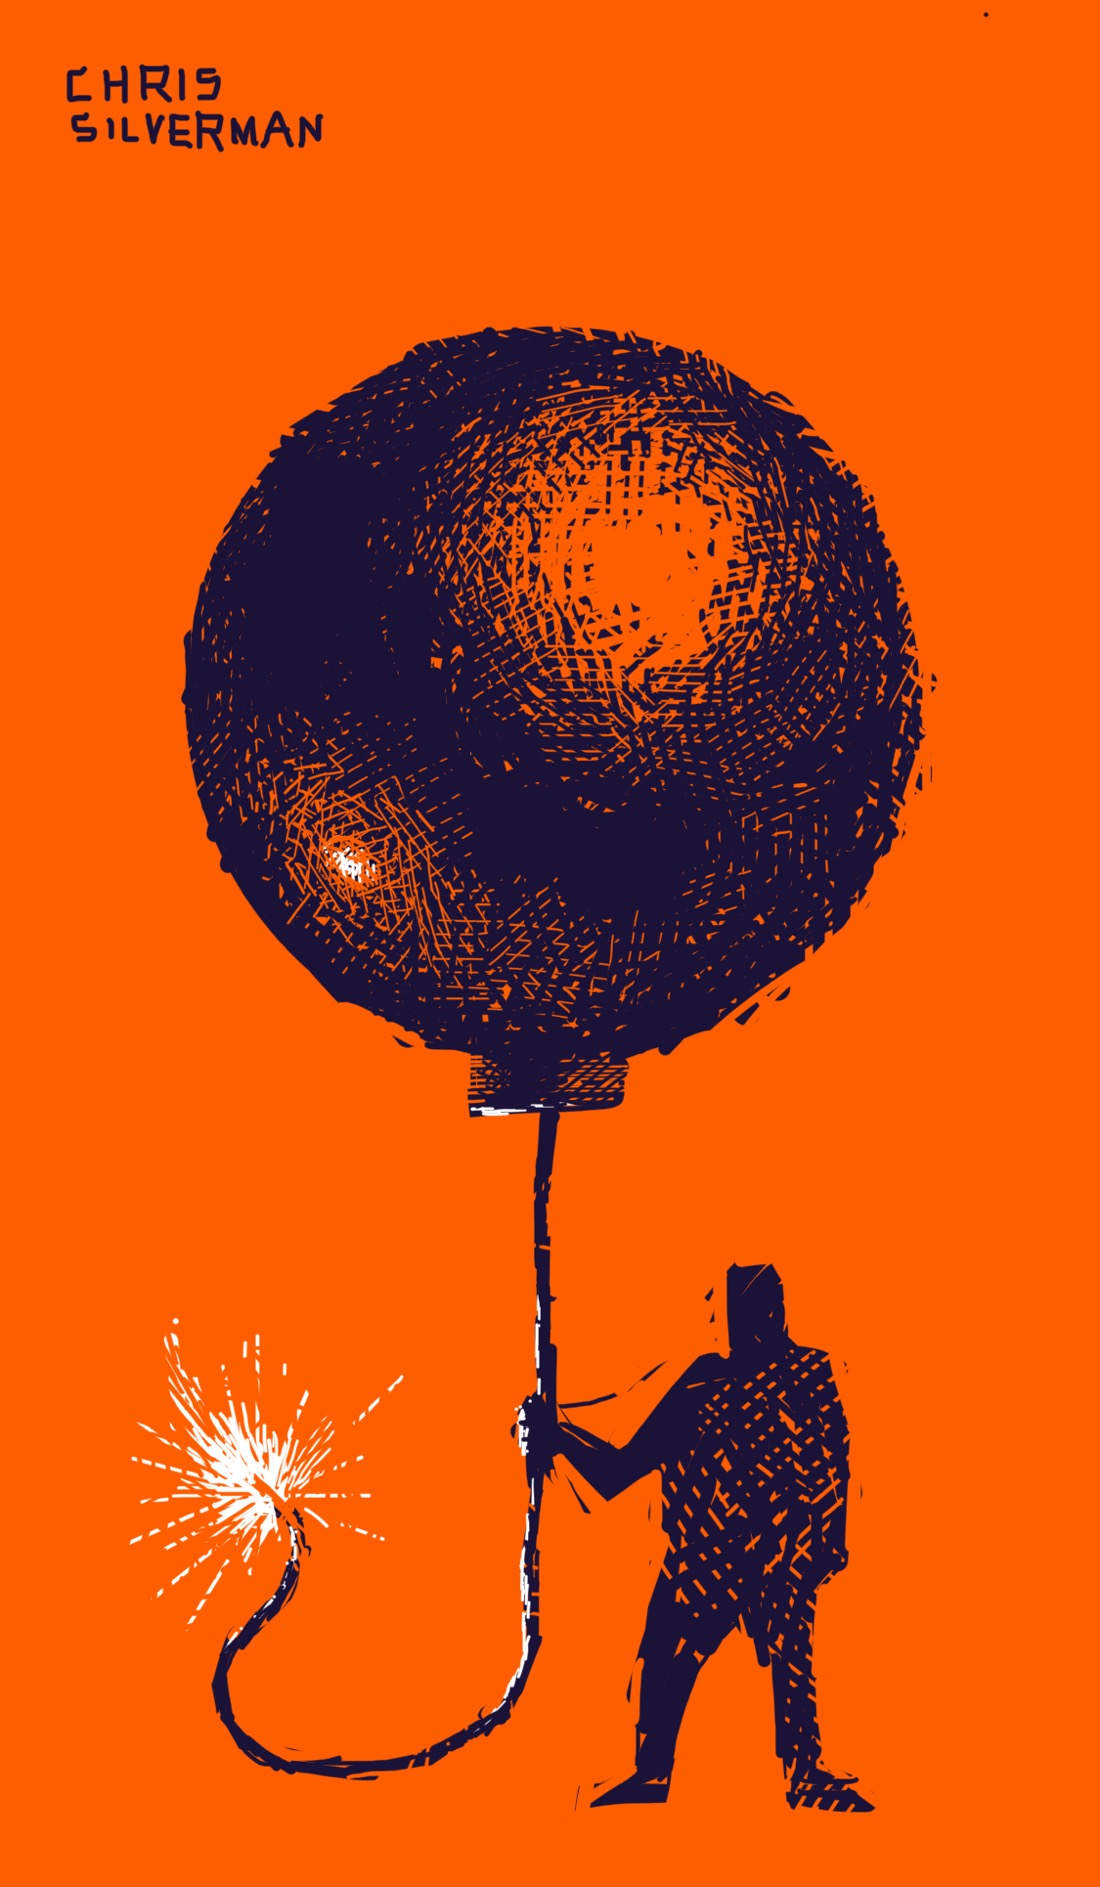 A large, spherical cartoon bomb, but upside down and hovering in space, so the fuse is hanging below it. Standing under the bomb, holding the fuse as though the bomb is a giant balloon, is a small figure. The fuse is lit. The drawing is black ink on an orange background, with the lit fuse and reflections rendered in white.